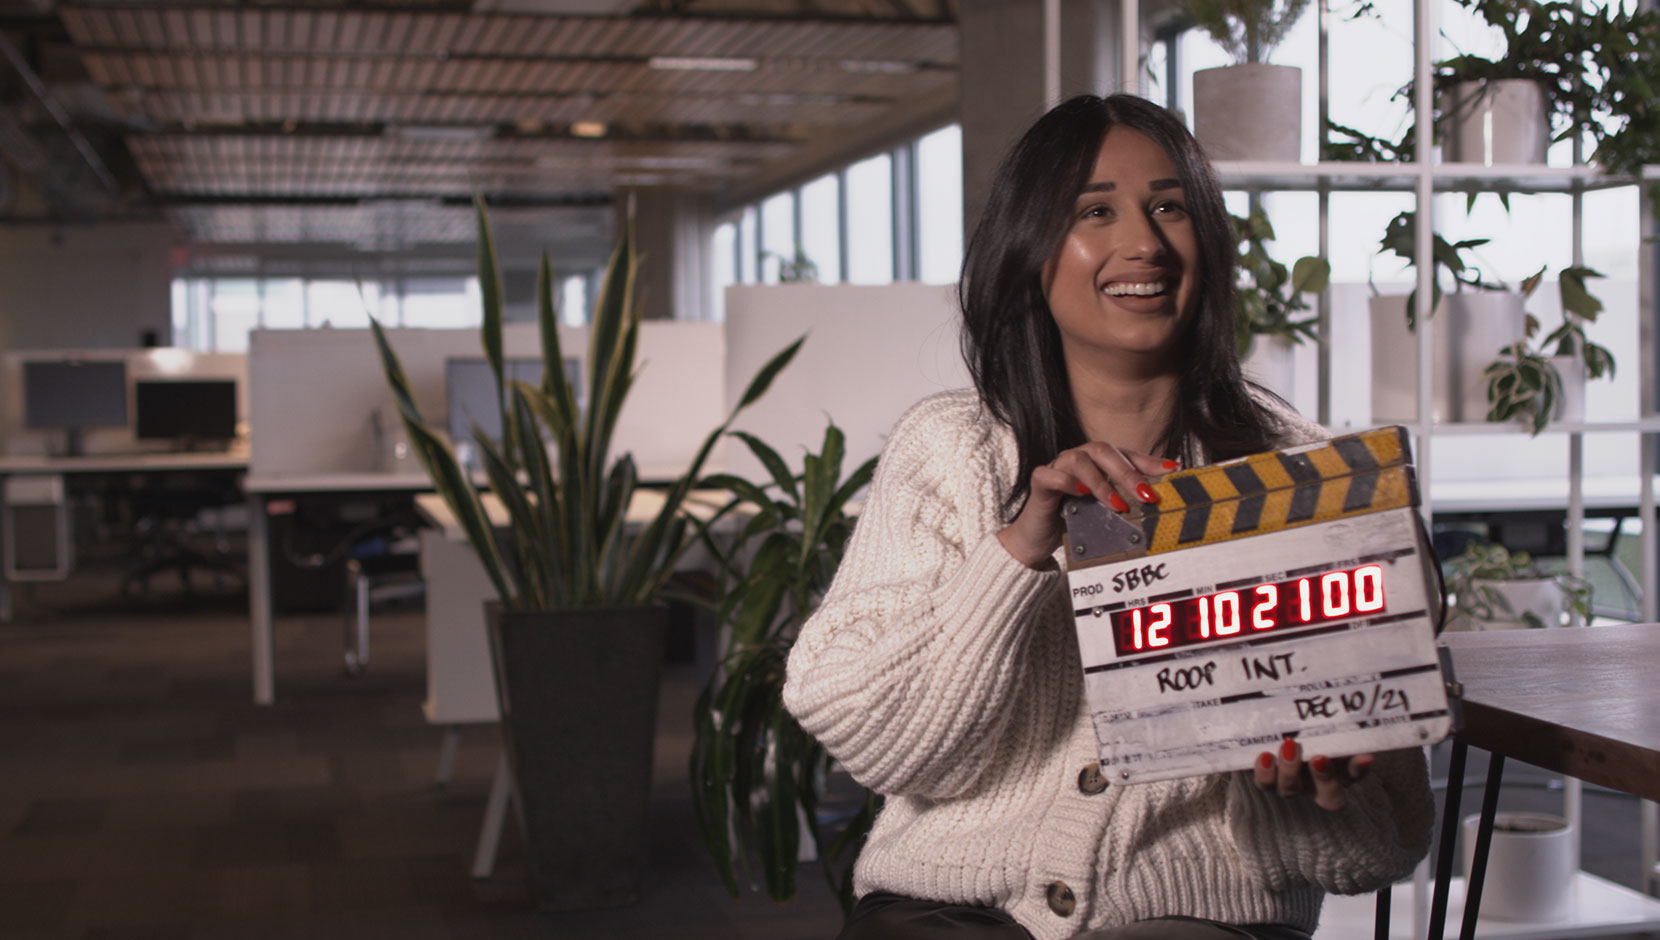 Roop Johal of Small Business BC is smiling and holding a film slate. She is a woman of colour in the SBBC office, with dark hair and a cream sweater.